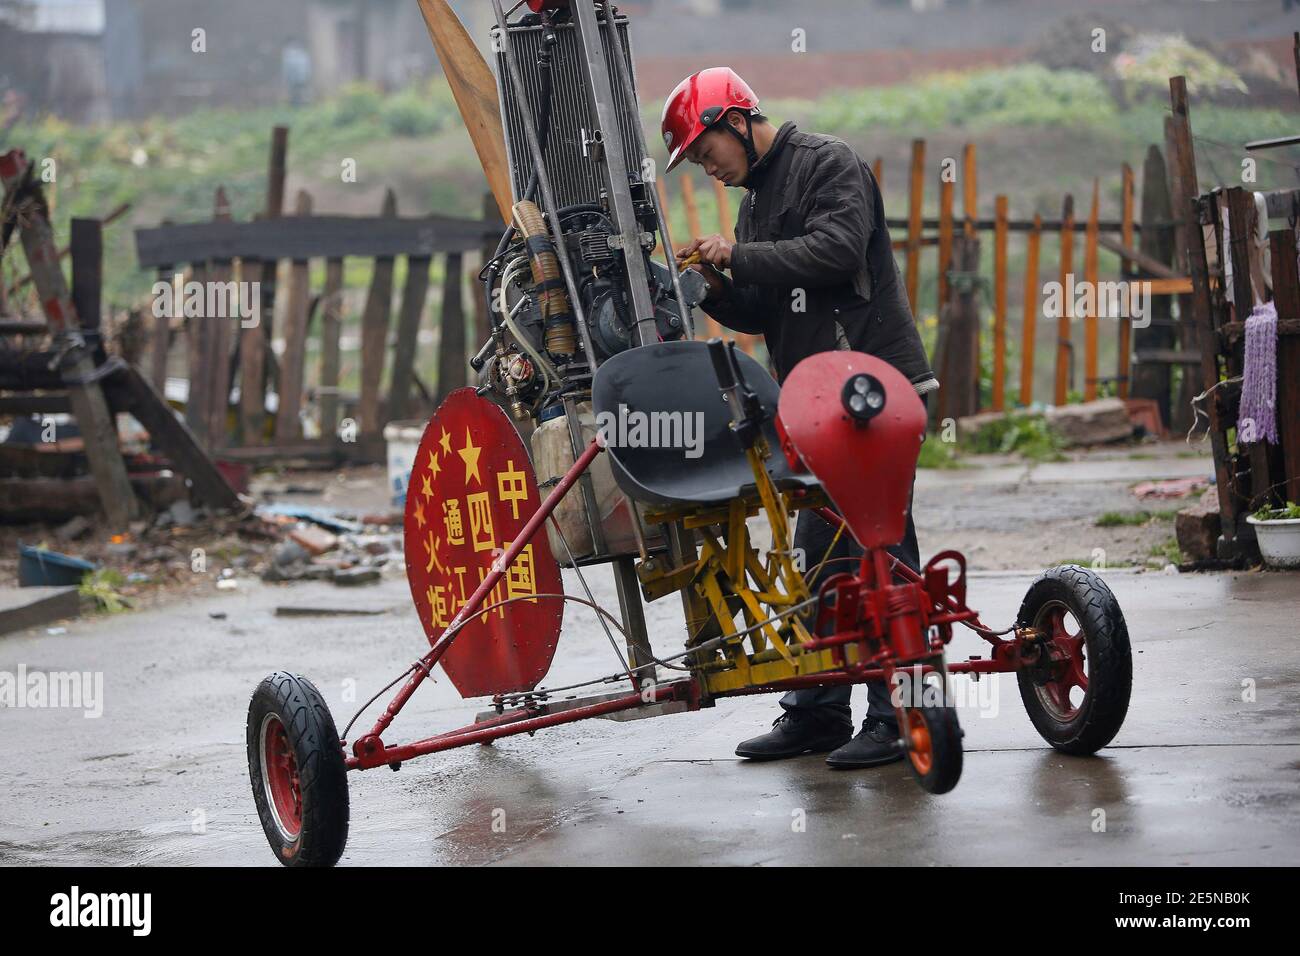 Luo Jinsha checks his home-made aircraft during a test flight on the outskirts of Shanghai, February 26, 2014. Luo, 28, a migrant worker living in Shanghai, spent around eight months and 40,000 yuan ($6,529) to build the plane to fulfil his dream to fly. Despite failing during the first test flight, Luo said he will not give up hope on improving his plane so as to eventually fly it successfully. The aircraft was able to move quickly on the ground but could not take to the air on second attempt. REUTERS/Aly Song (CHINA - Tags: SOCIETY TRANSPORT) Stock Photo